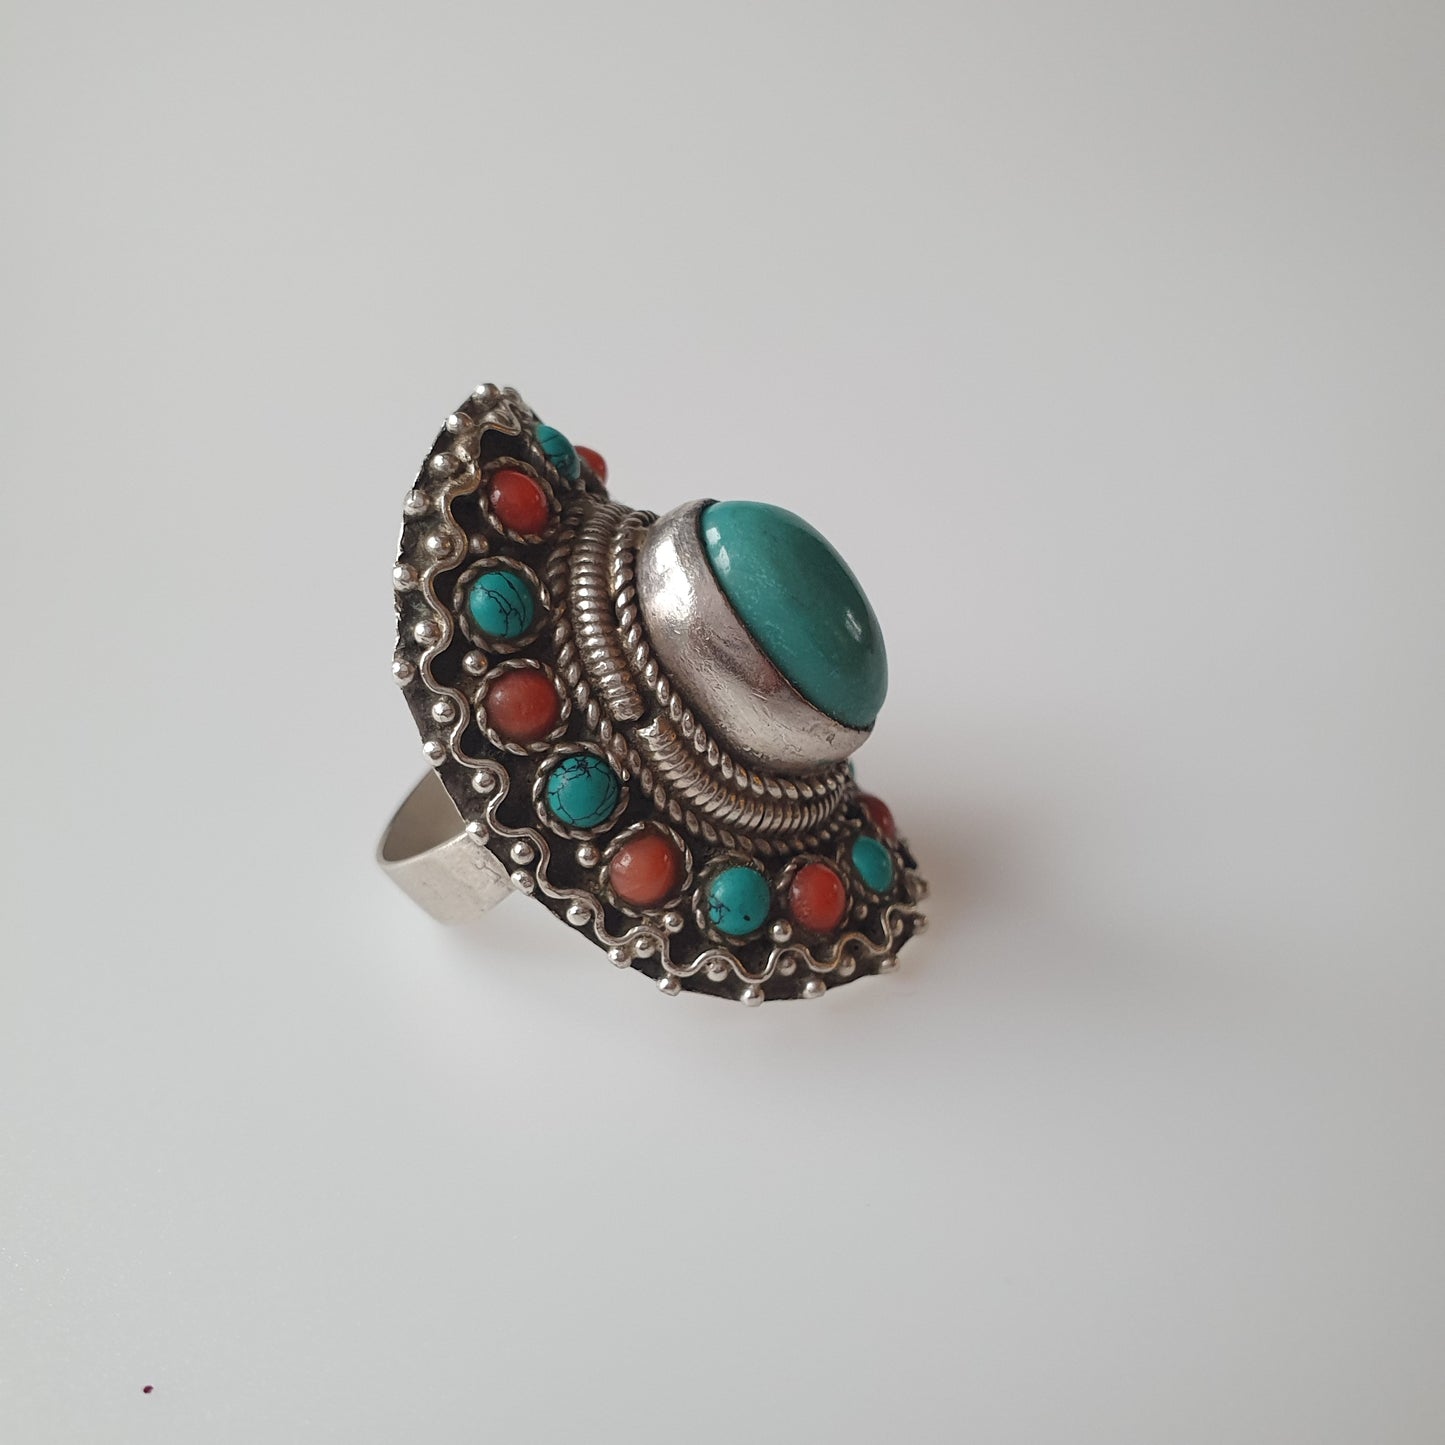 Bohemian ring sterling silver with turquoise and coral gemstone